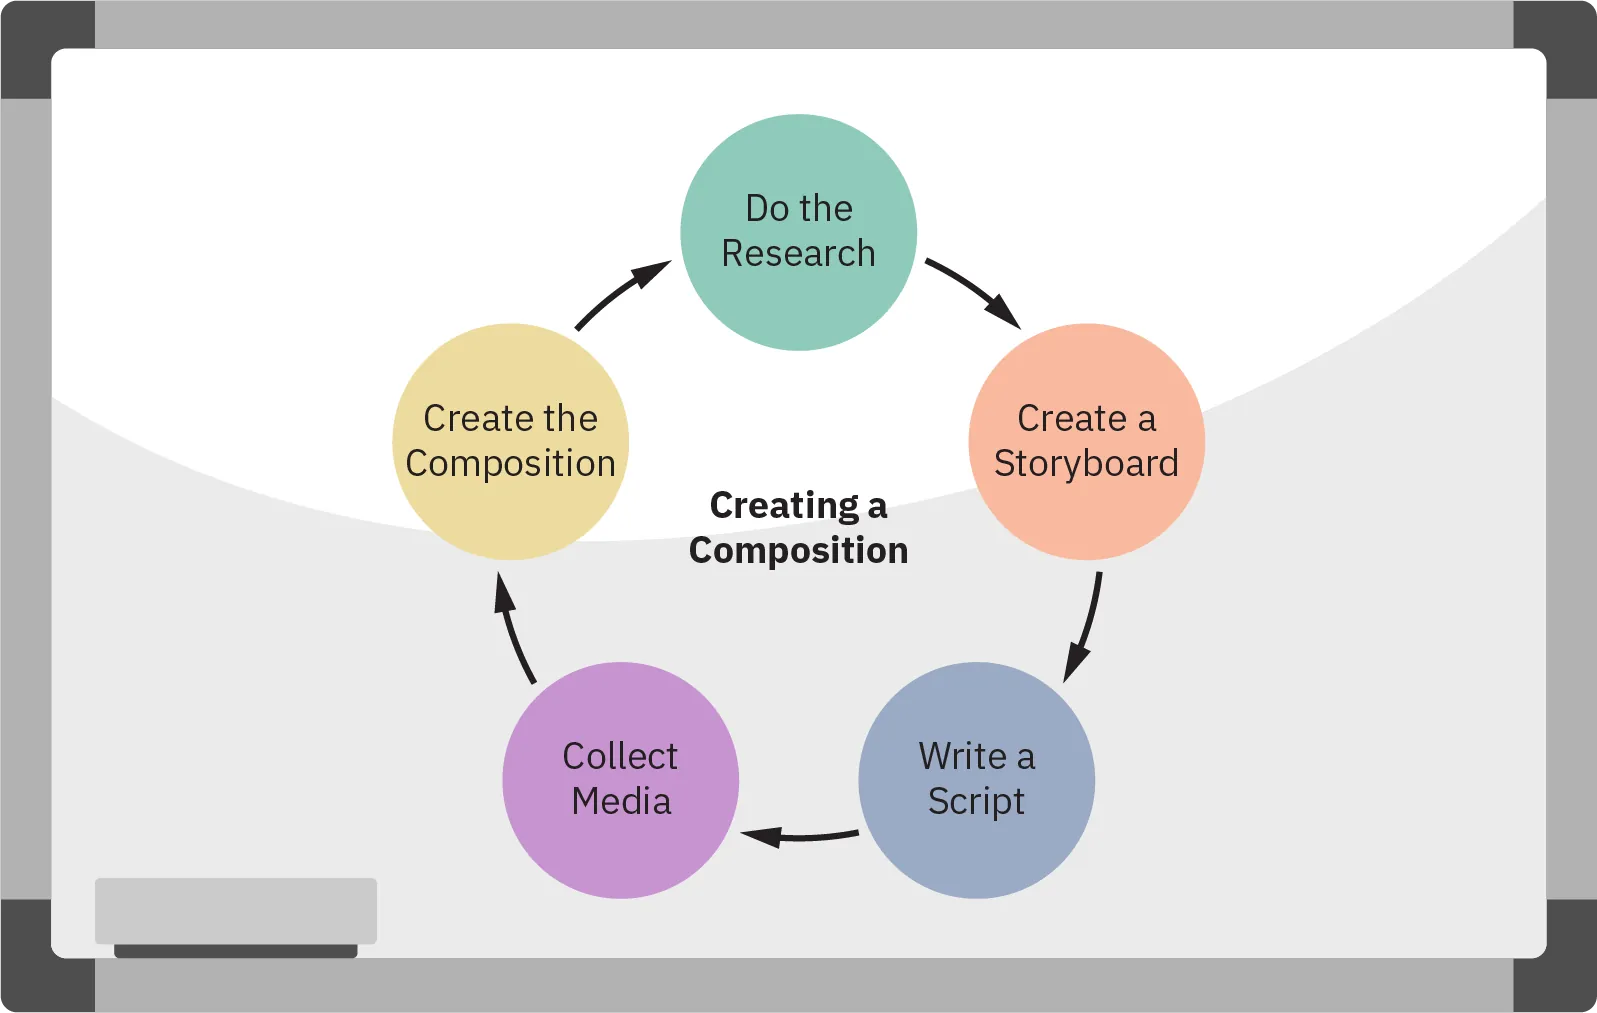 The circular process for creating a composition includes, “Do the research”, “Create a storyboard”, “Write a script”, “Collect Media”, and “Create the composition”.